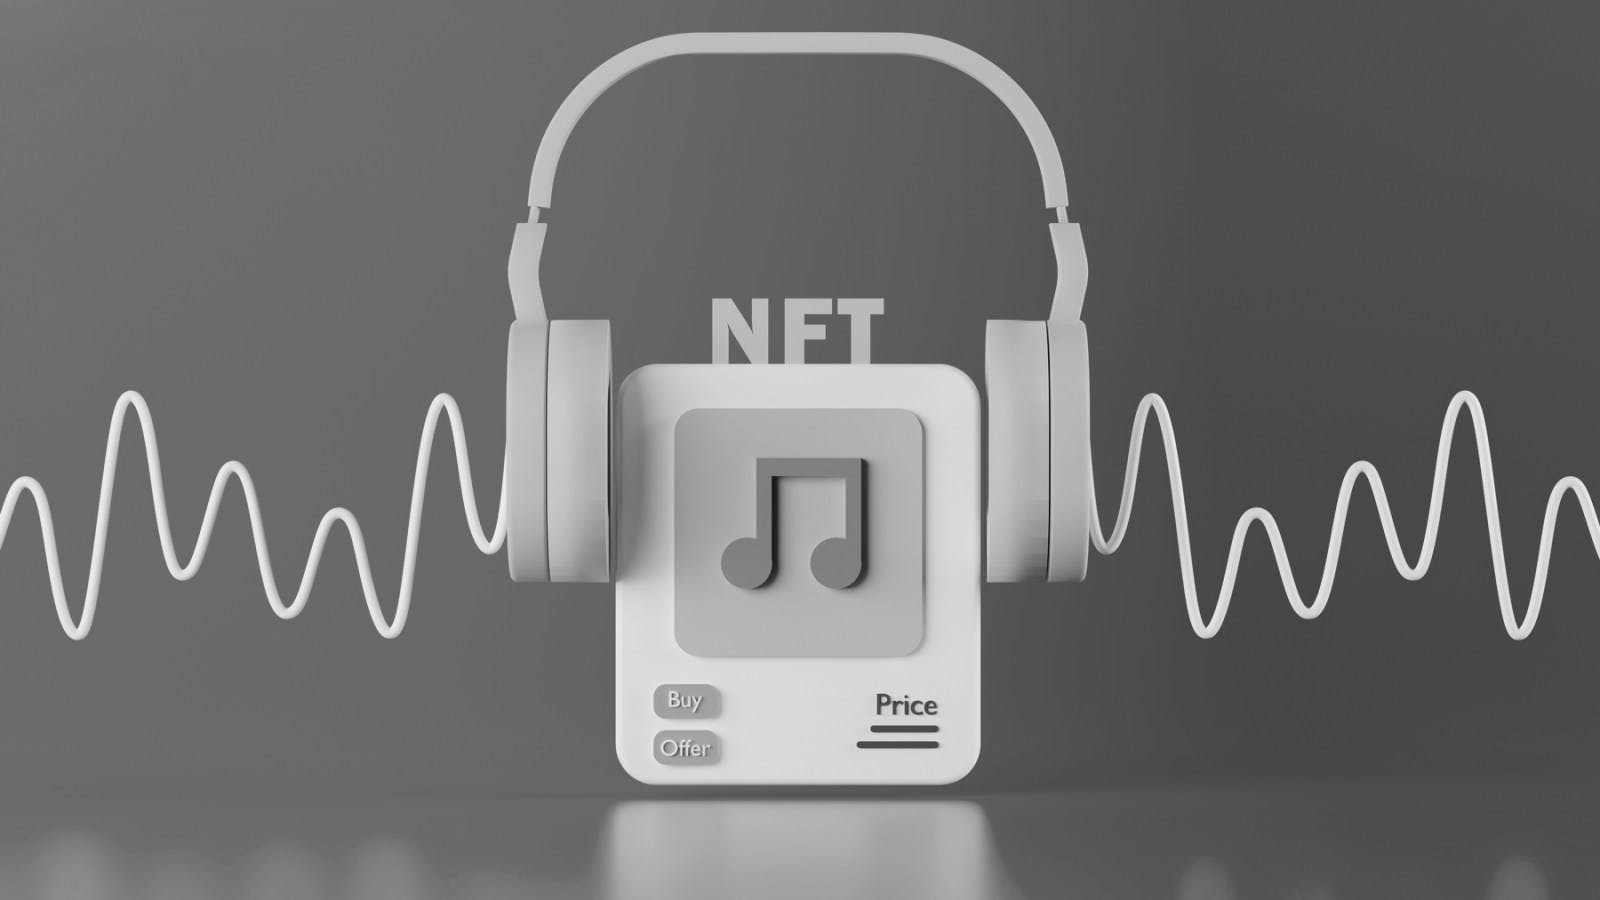 How Artists Can Combine NFTs and Music to Grow Their Brands